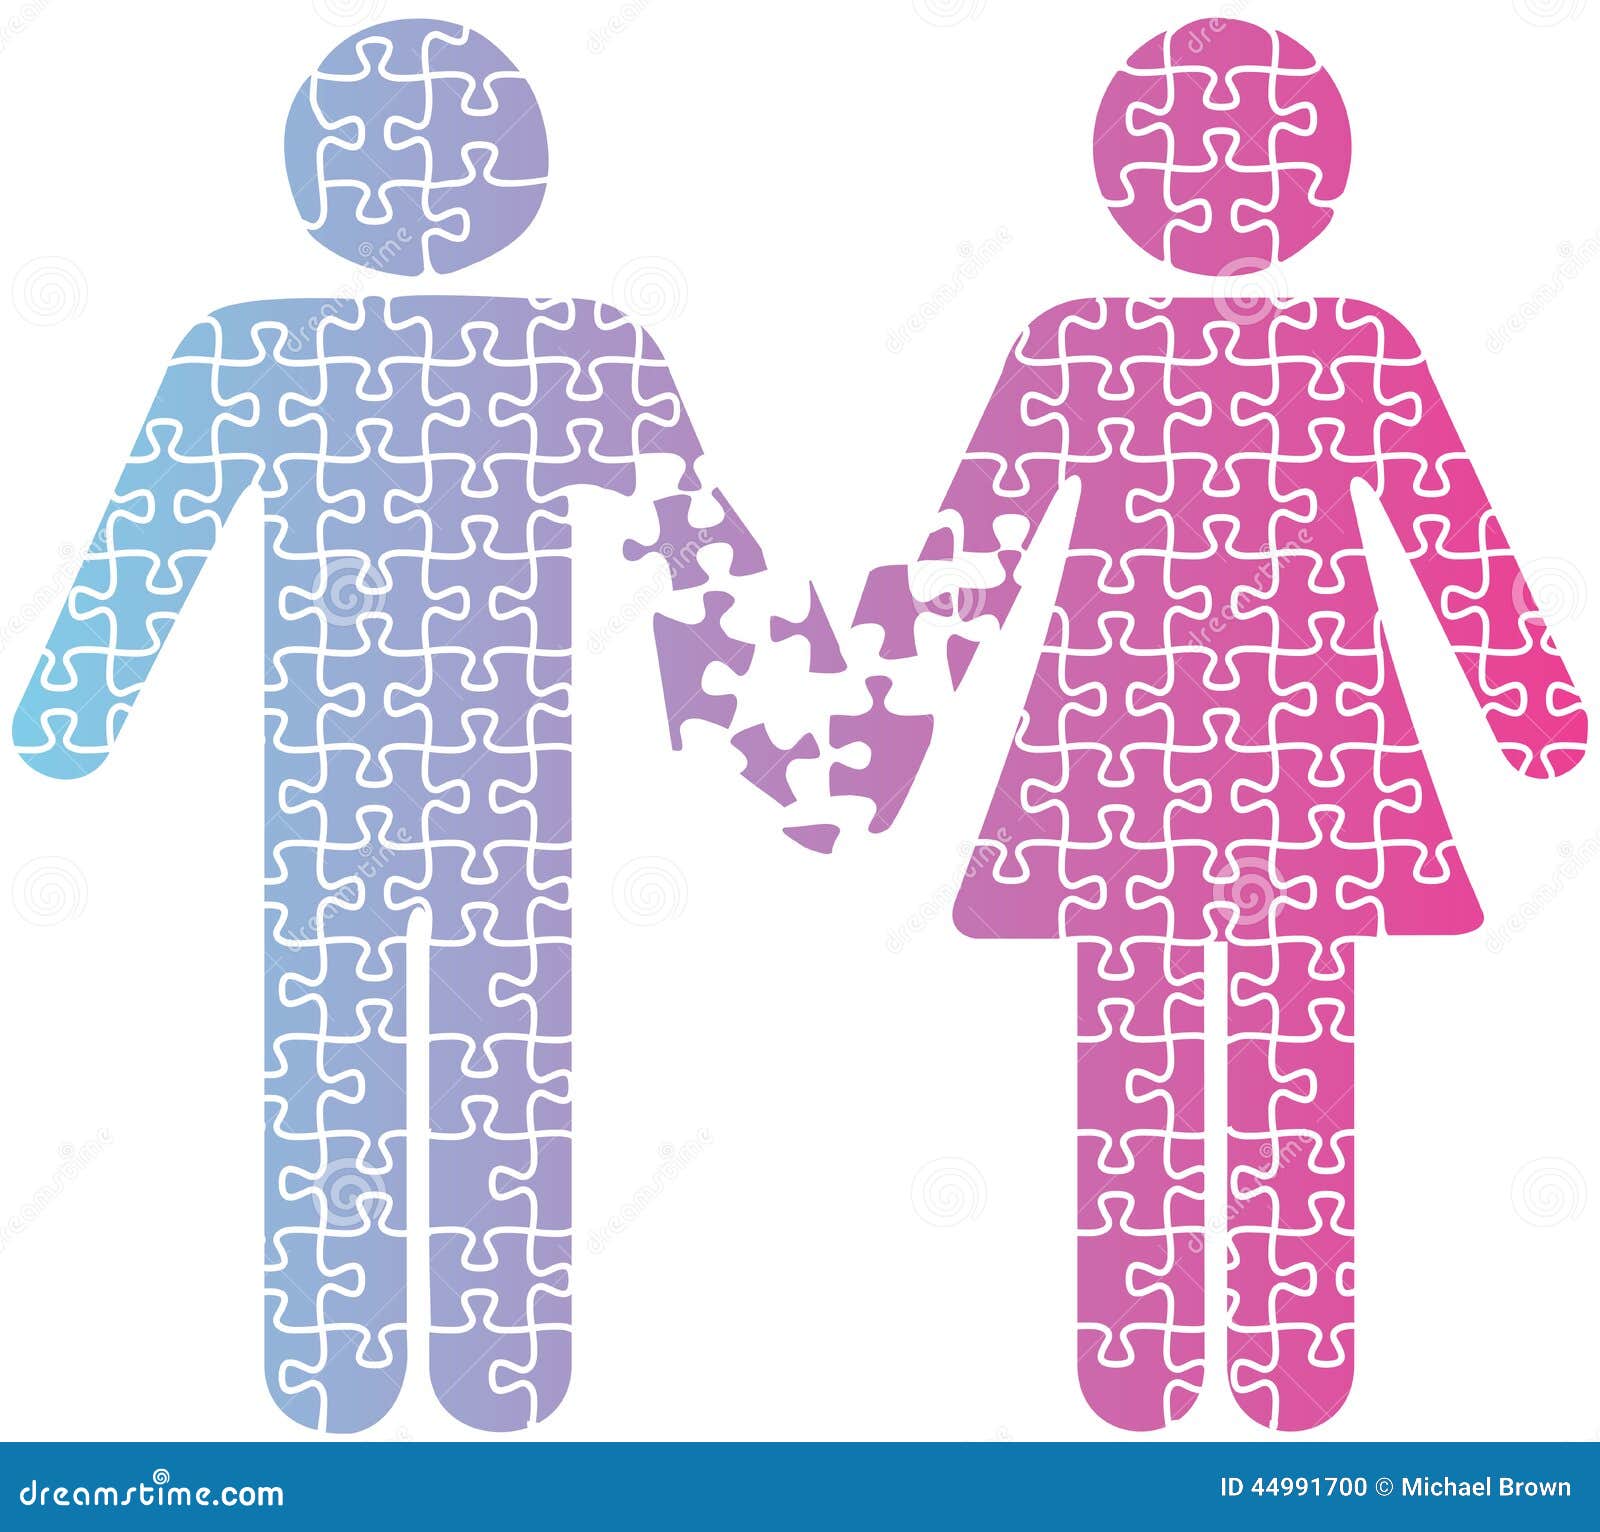 Couple Love Separation People Puzzle Stock Vector